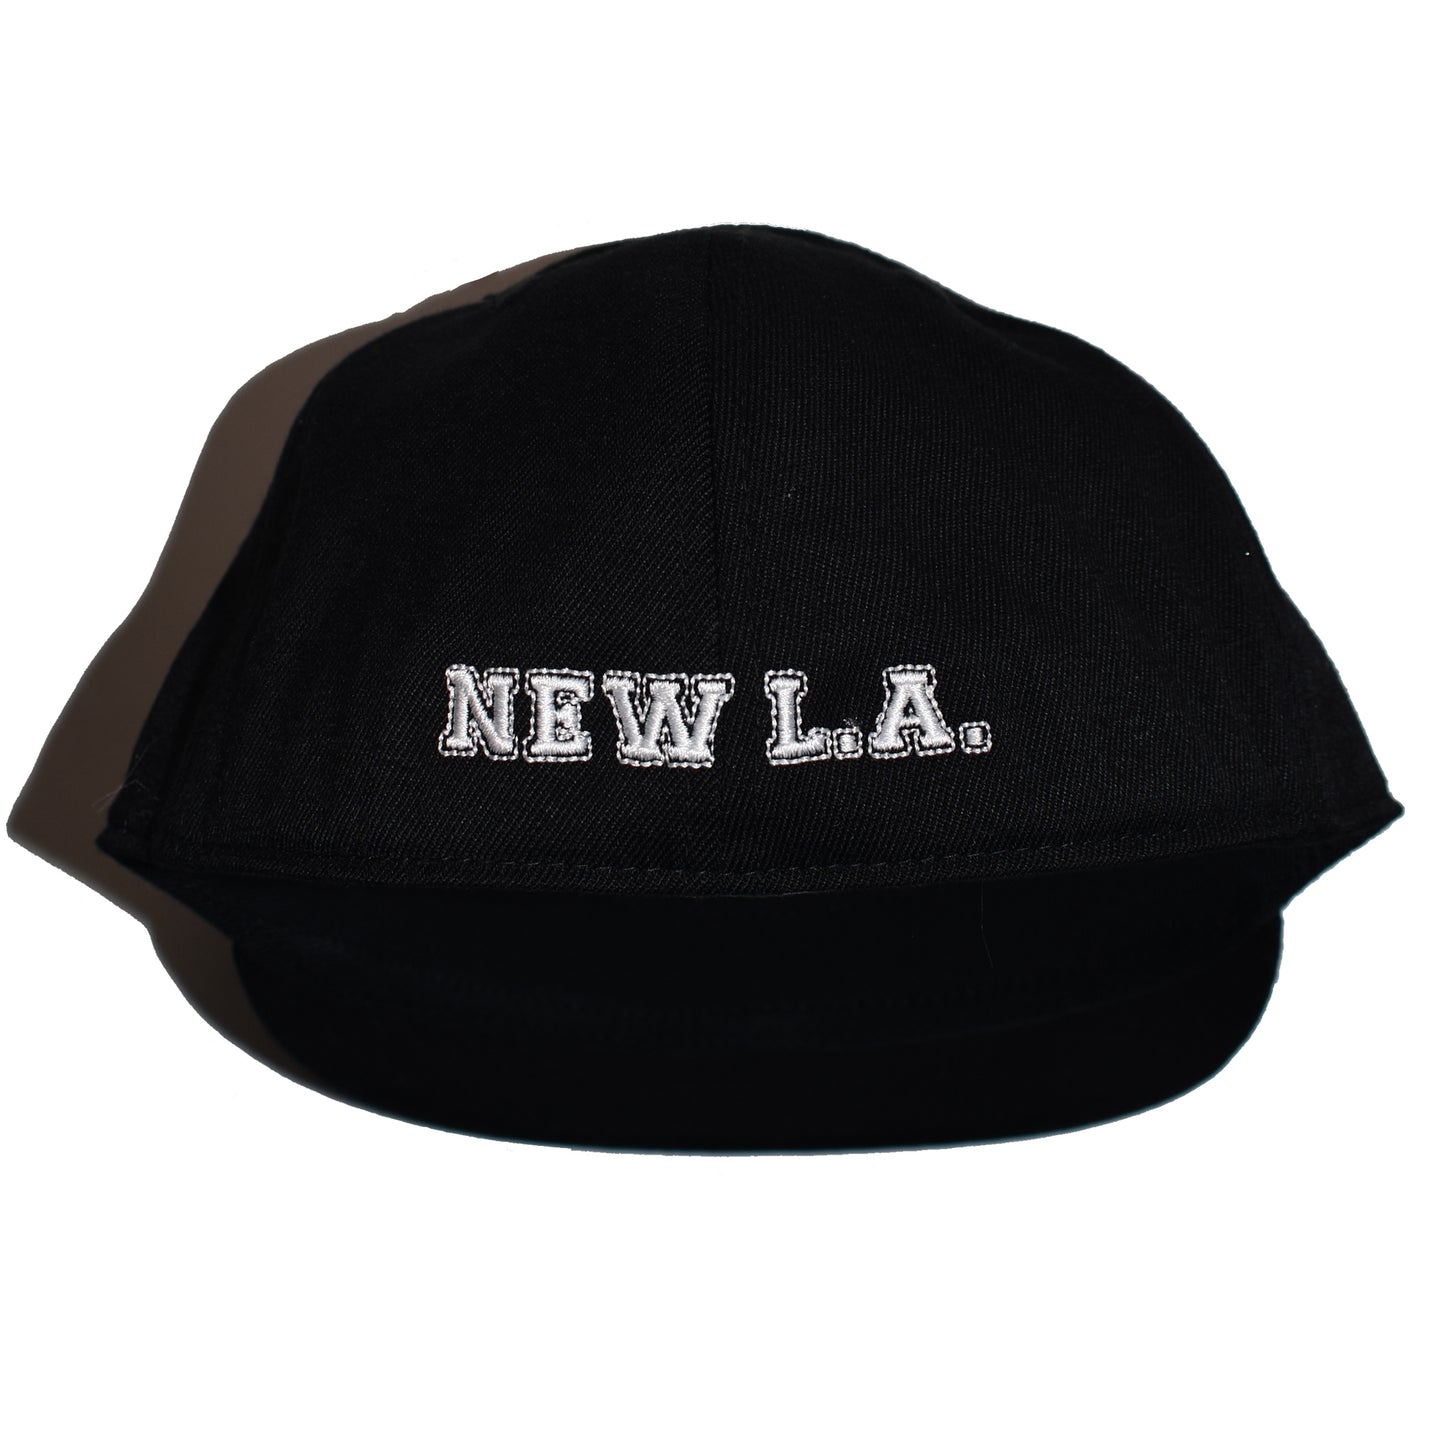 NEW LA Fitted Hat